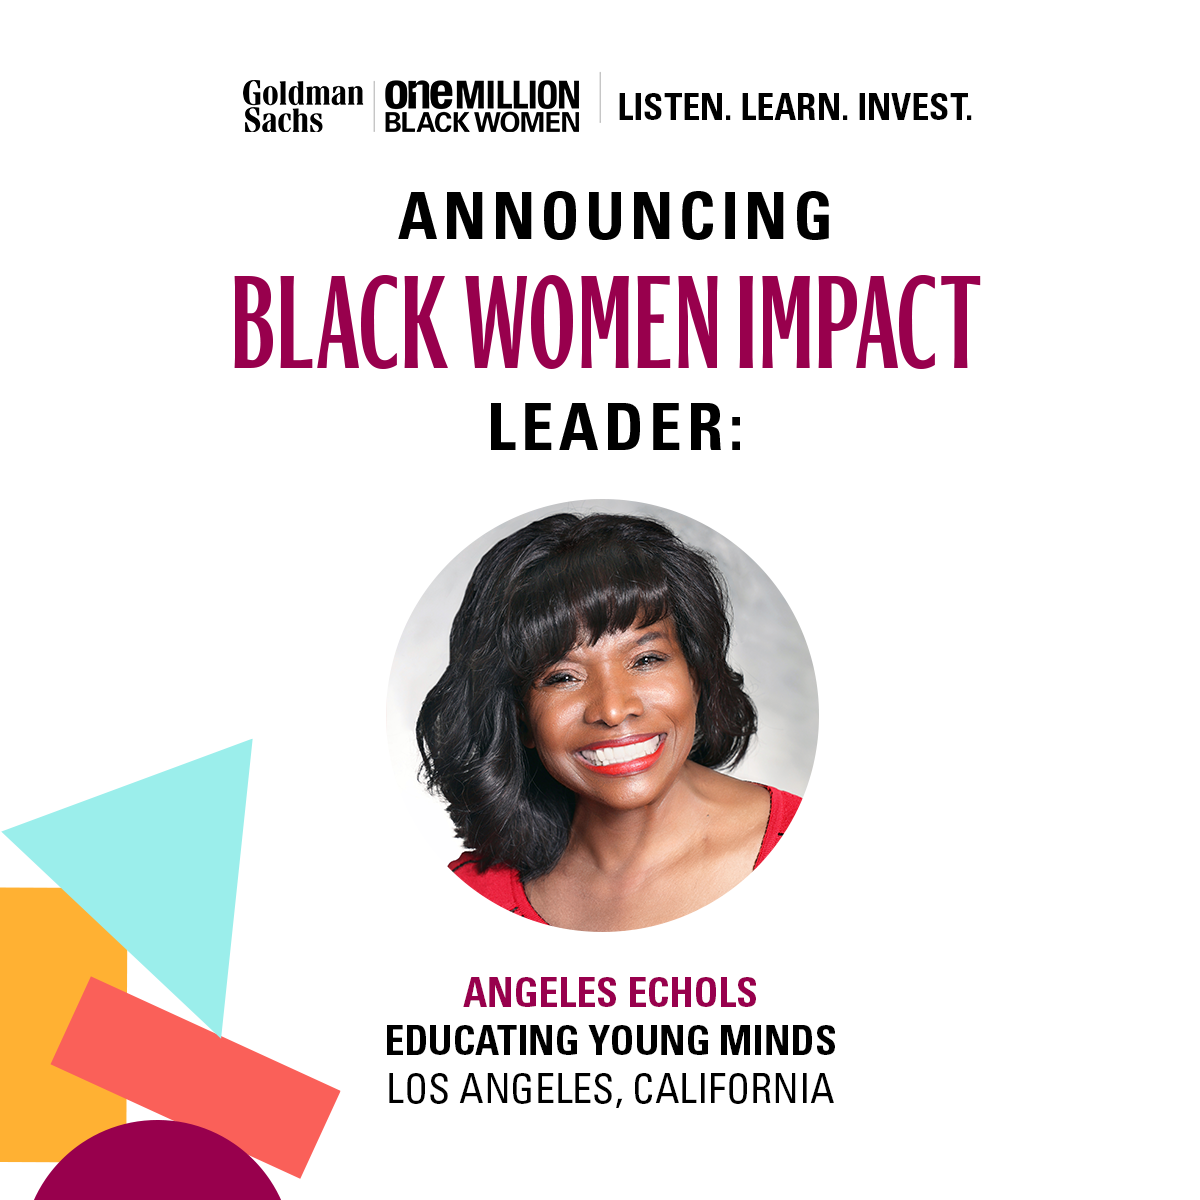 35 Year Business Veteran is One of 50 Recipients of the Black Women Impact Grants from Goldman Sachs: One Million Black Women in 2022